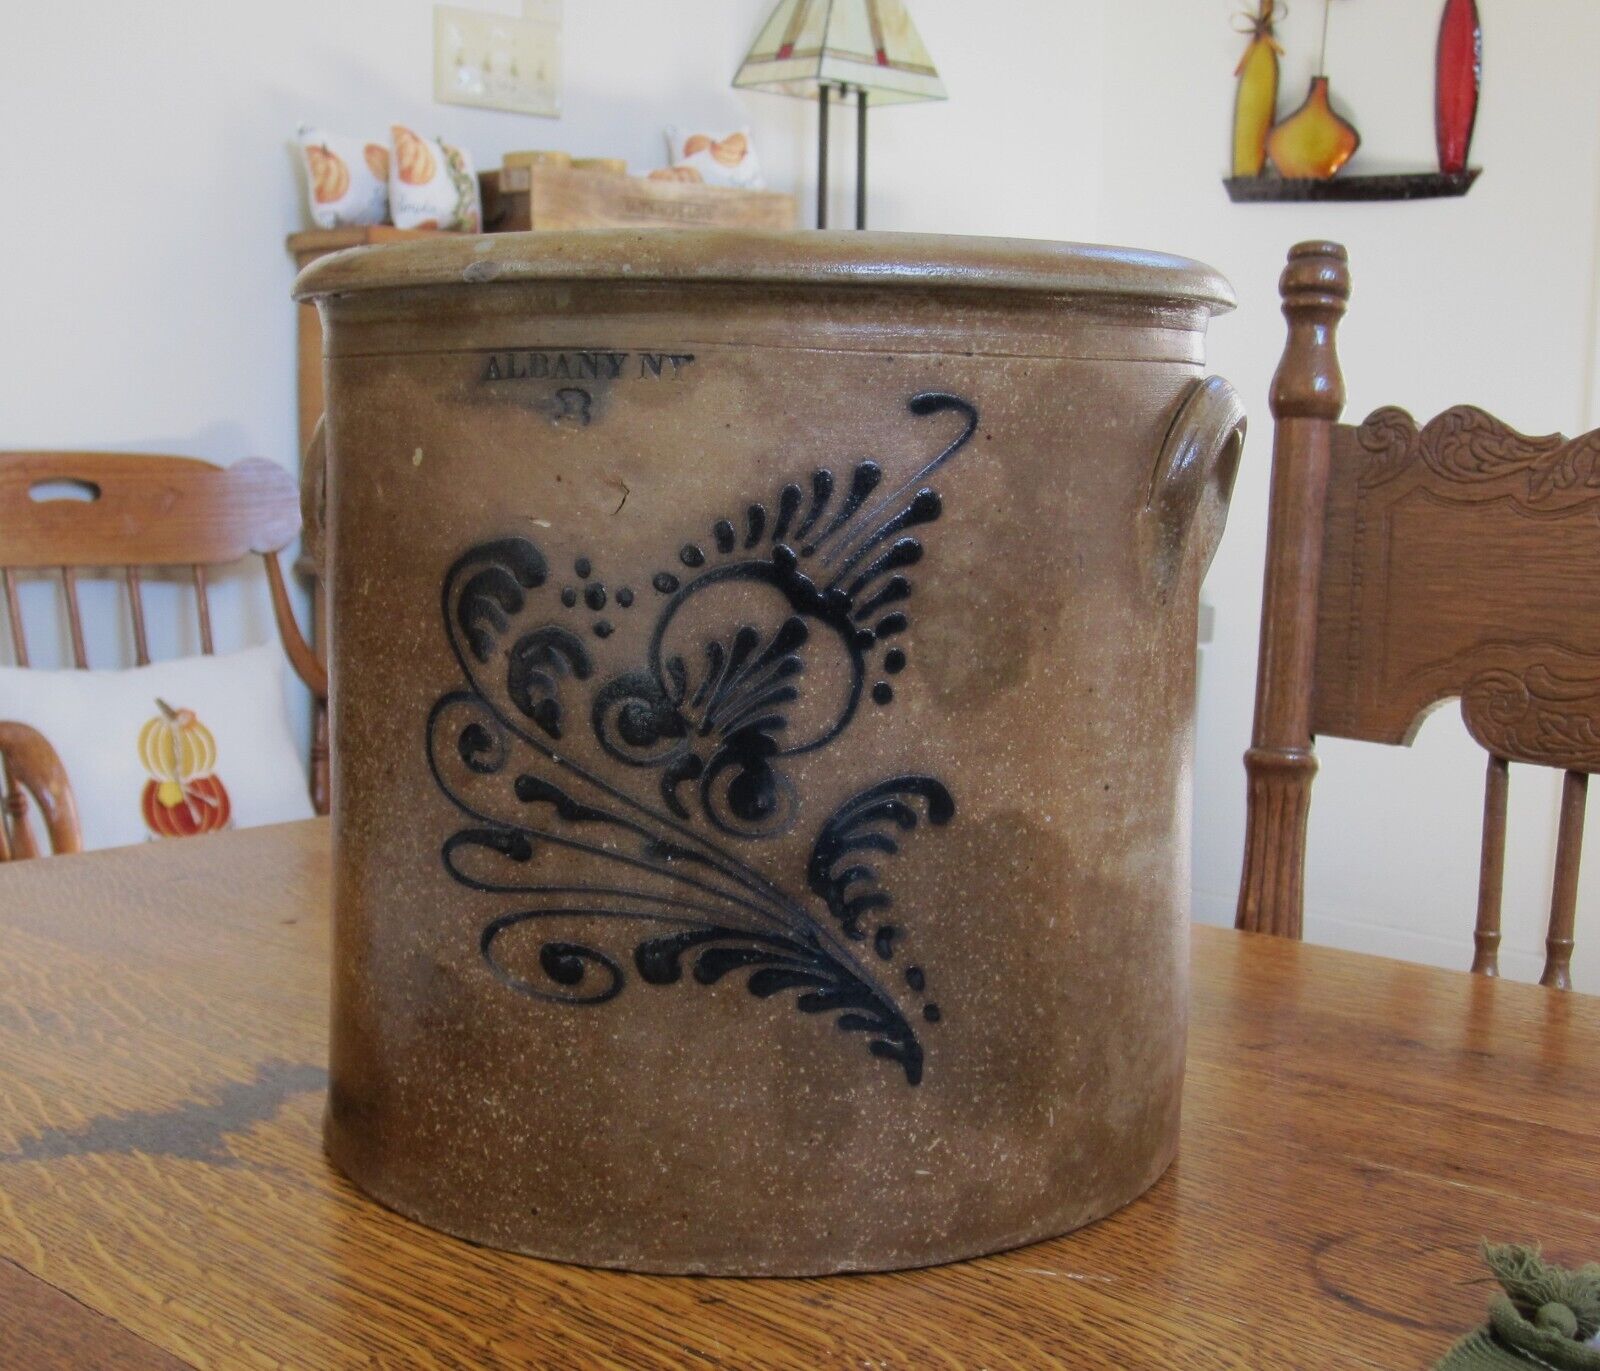 Antique Valuations: South Hill Homestead:  Lg. Antique Stoneware 3 gal. Crock - Albany NY  ca.1800's